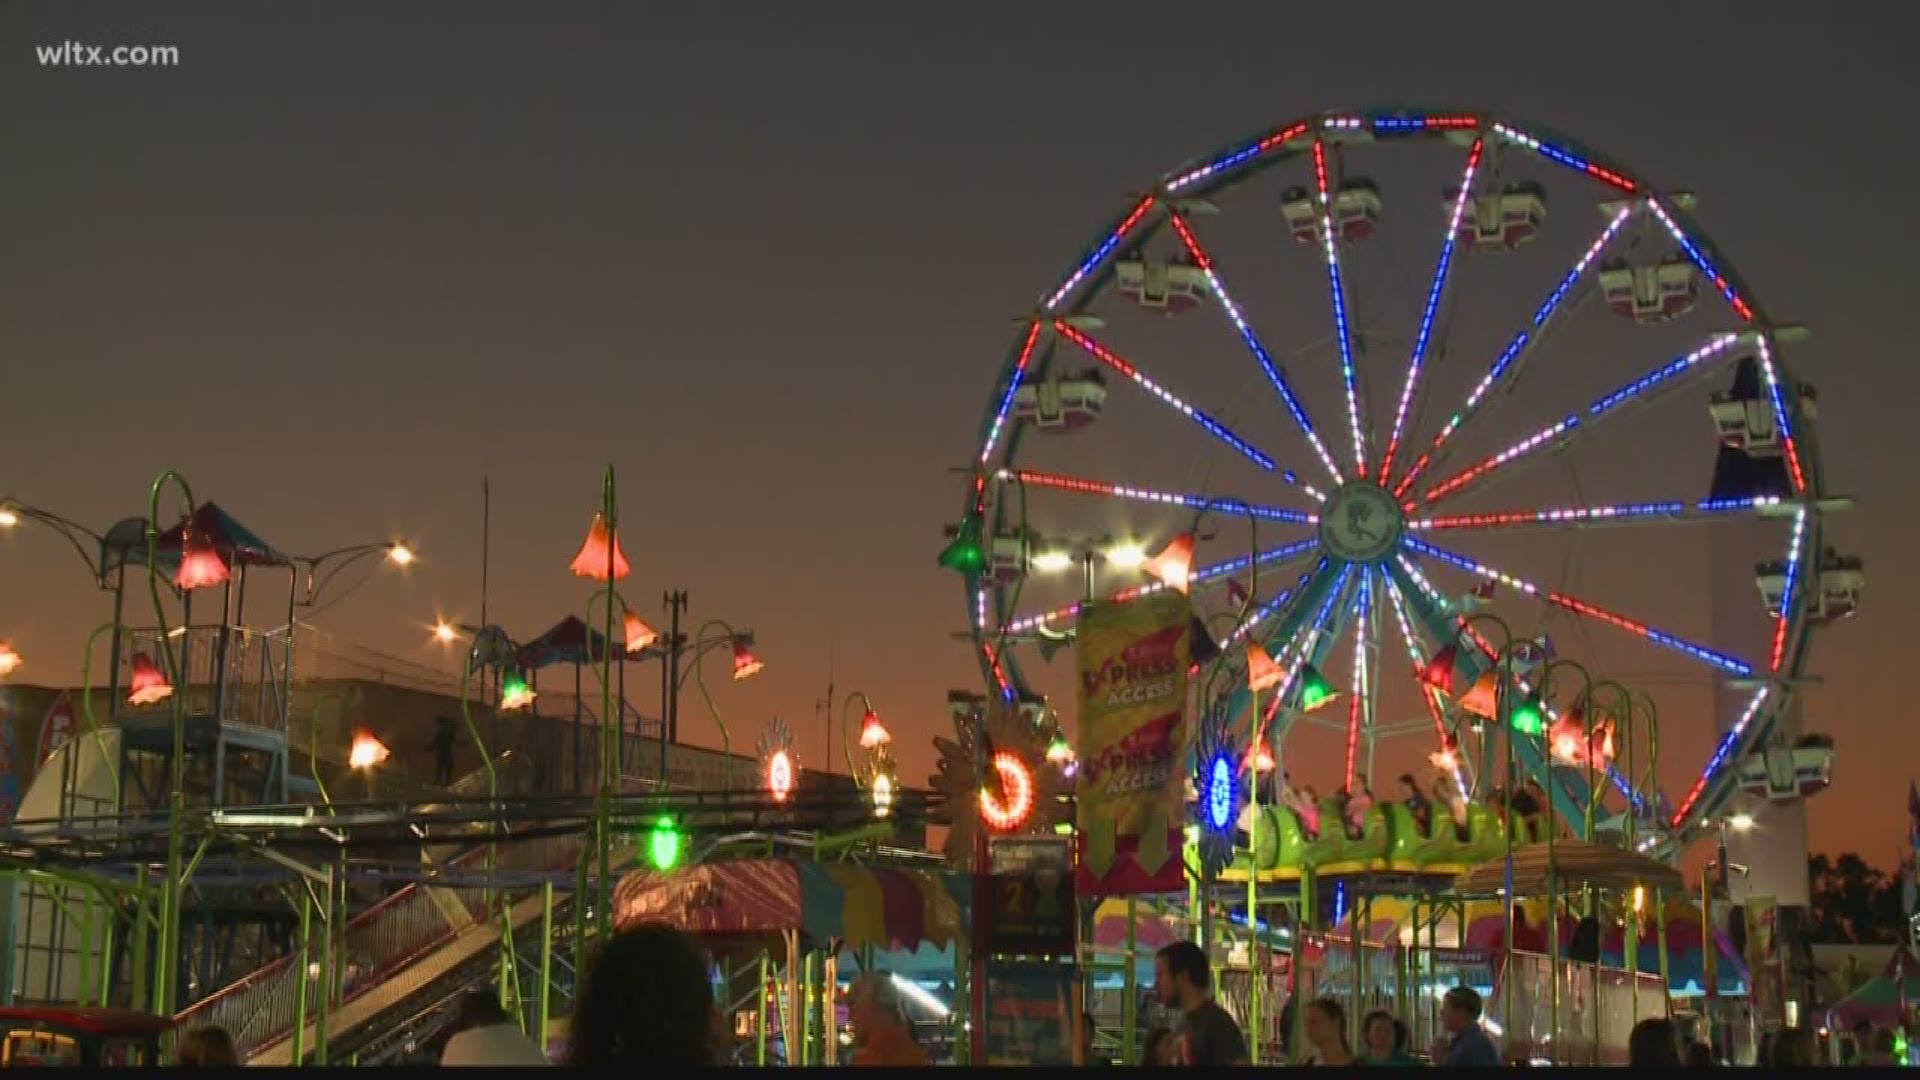 Admission tickets, ride vouchers and concert tickets are available for the fair starting Wednesday.